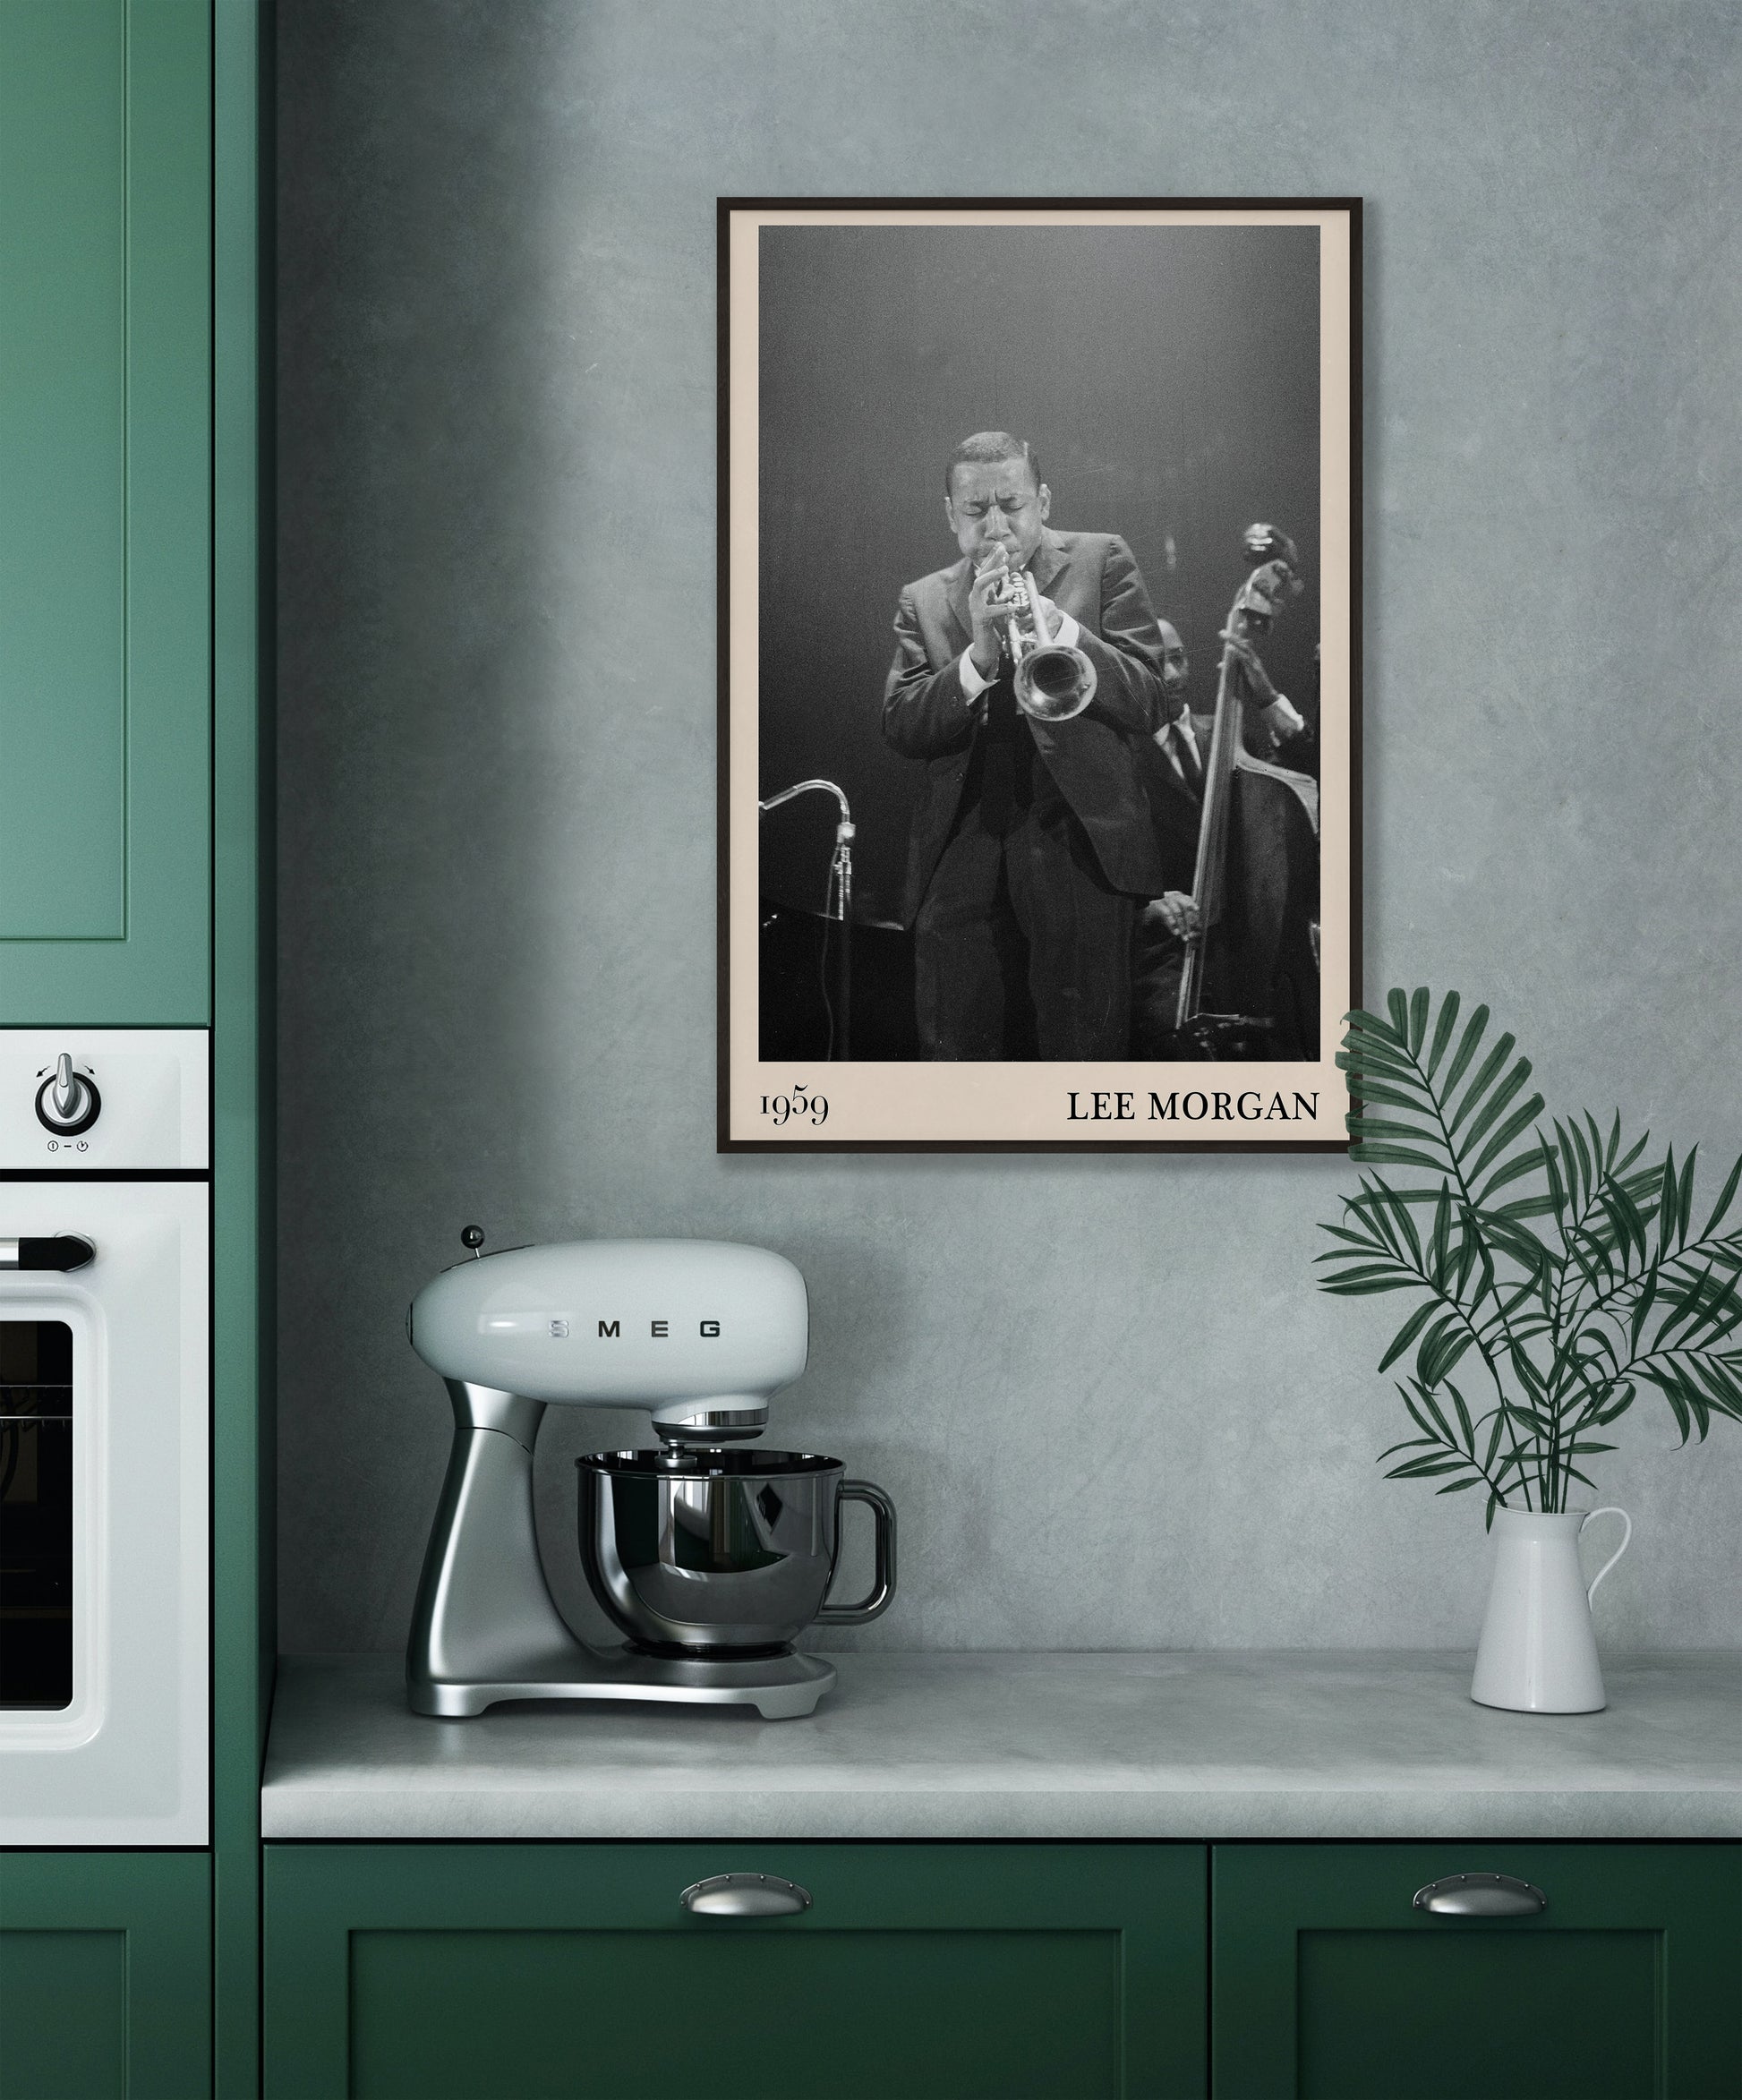 1959  photograph of Lee Morgan playing the Trumpet, transformed into a stylish black-framed jazz poster hanging on a grey kitchen wall